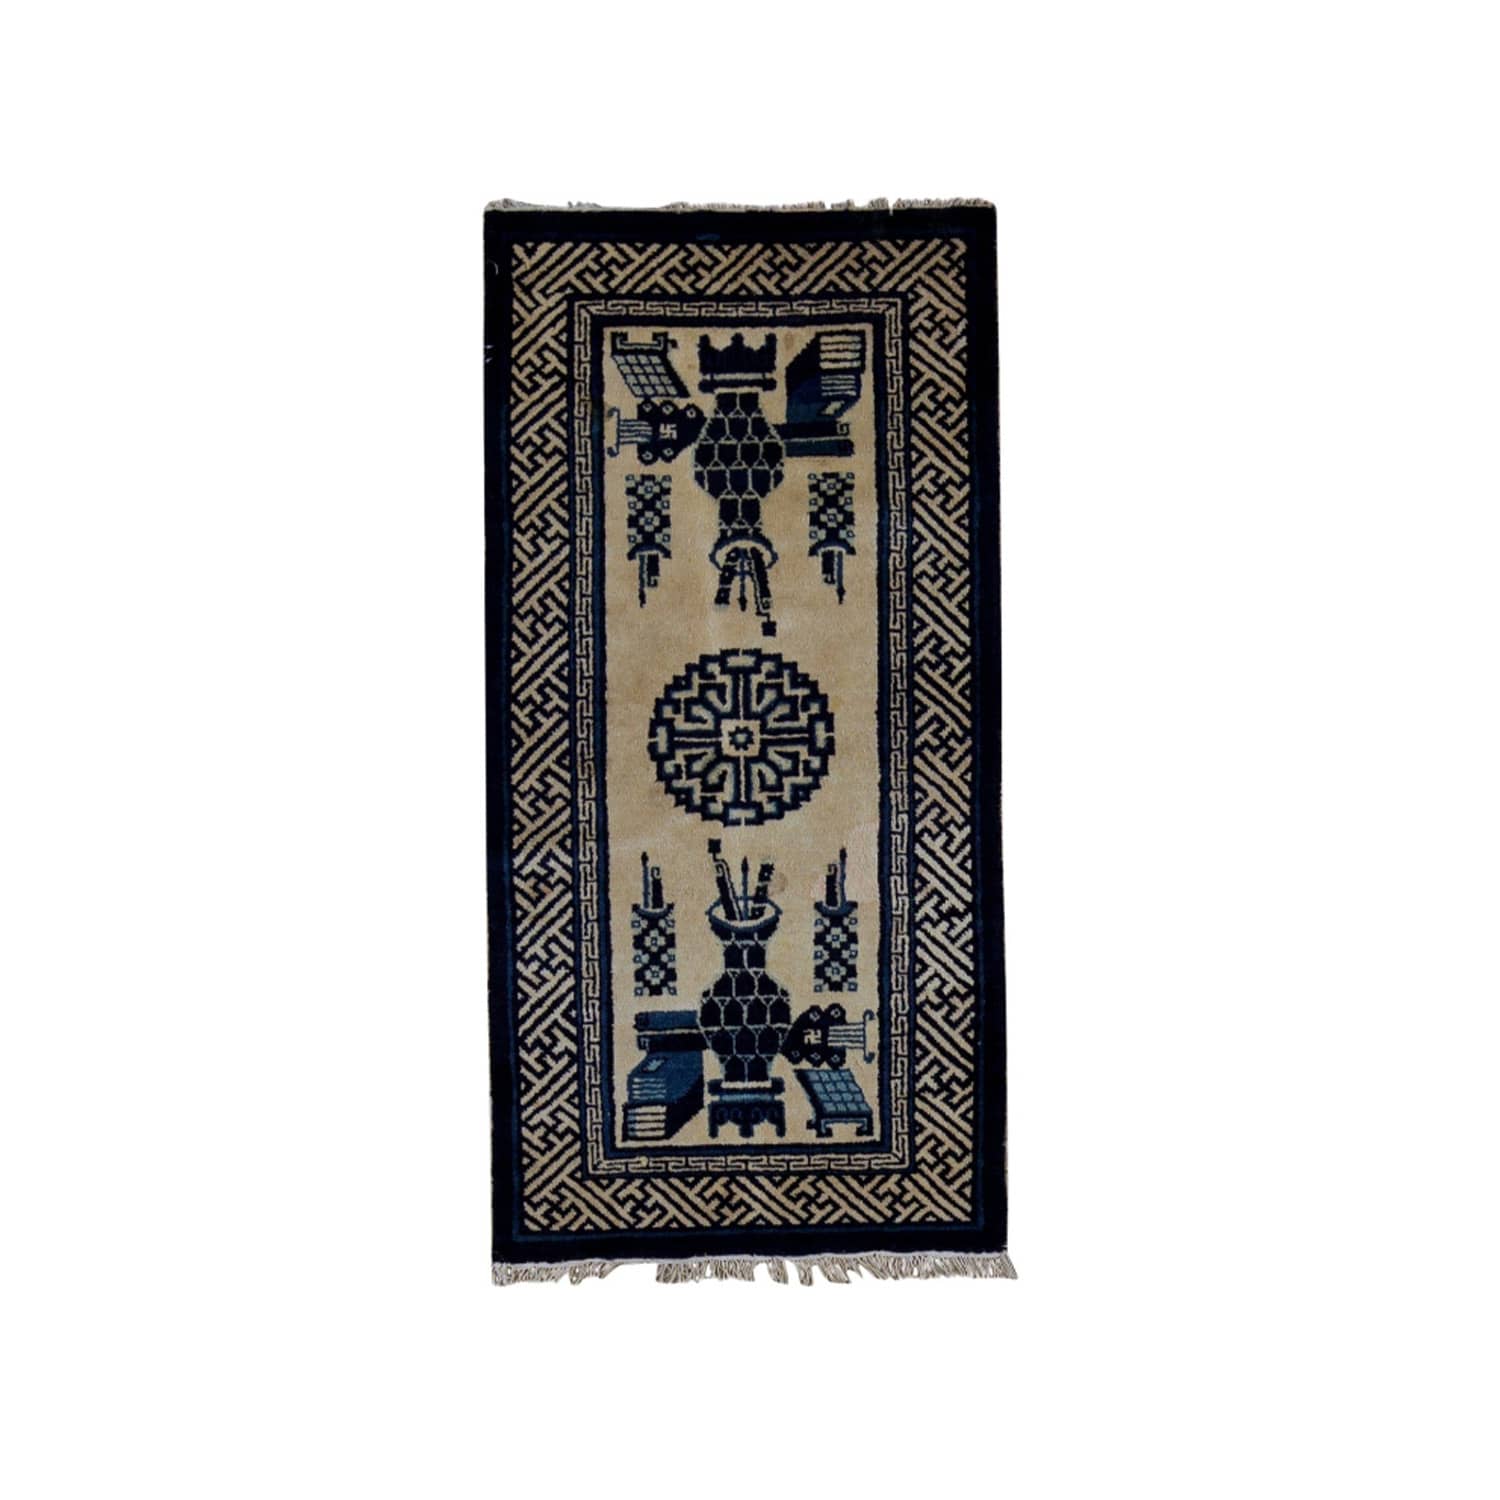 Where to Buy Vintage Rugs Online | Apartment Therapy